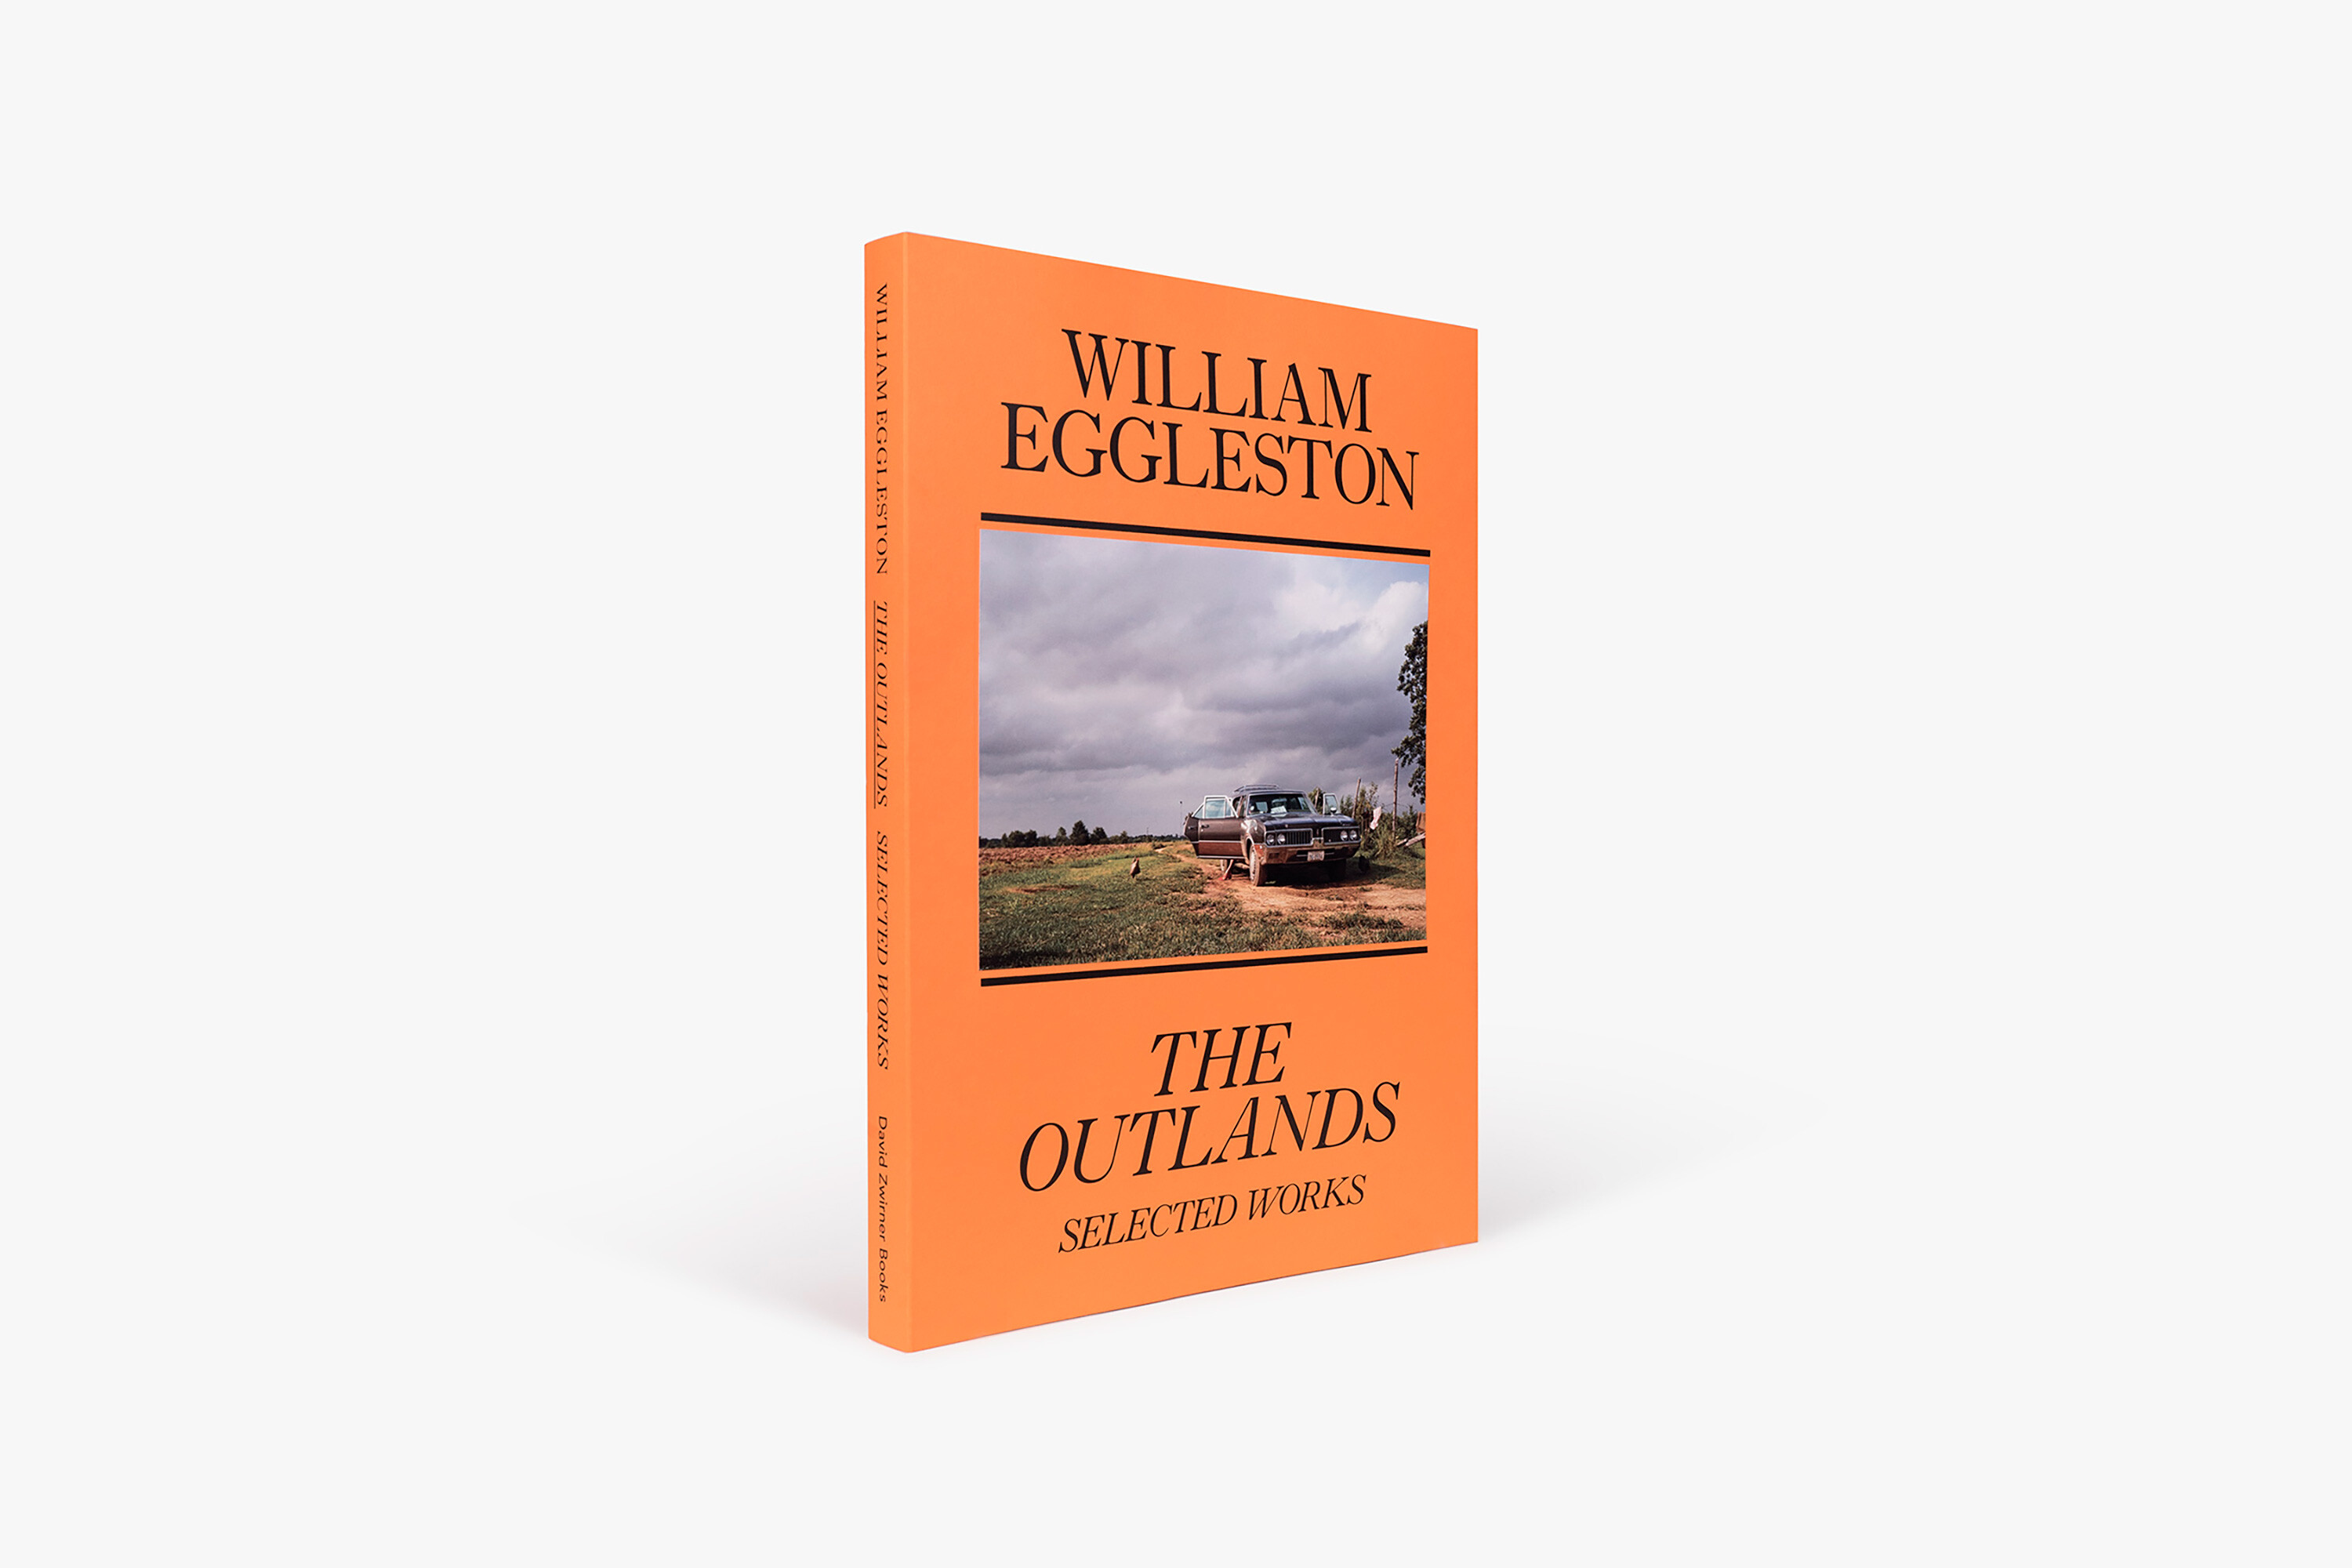 William Eggleston: The Outlands, Selected Works | David Zwirner Books